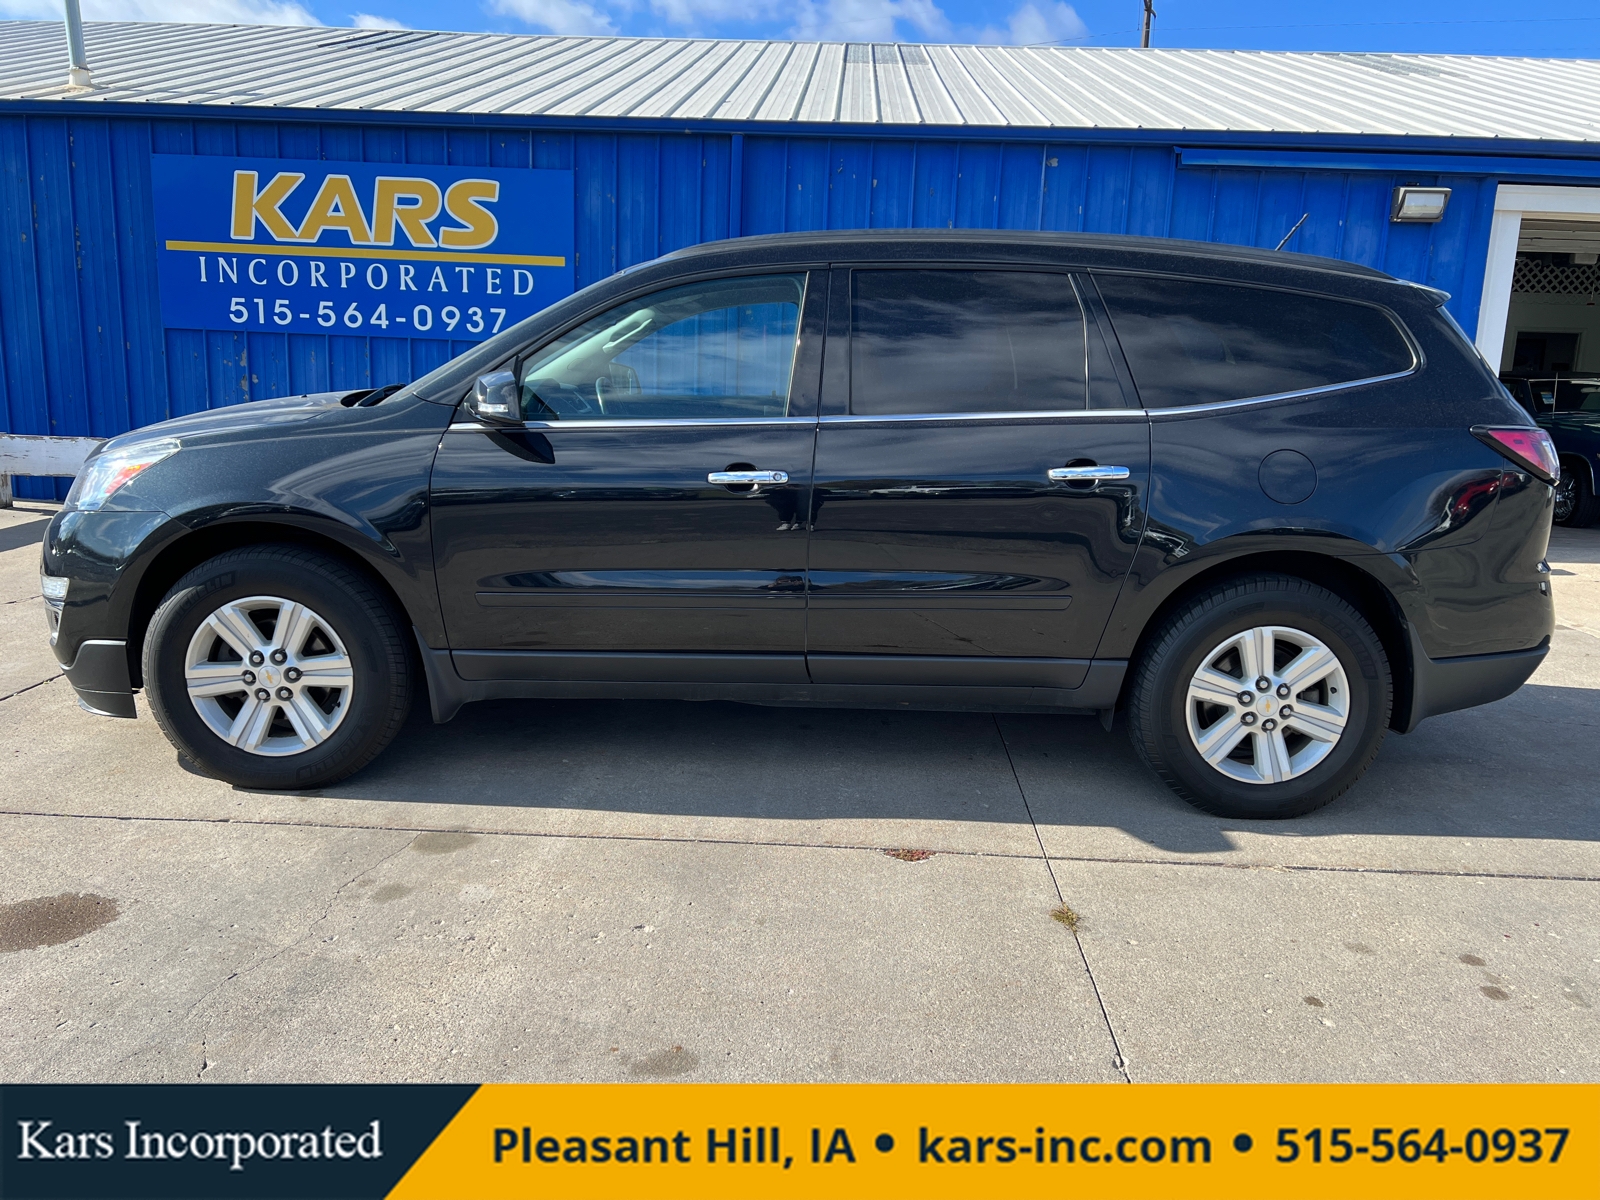 2013 Chevrolet Traverse LT AWD  - D13800P  - Kars Incorporated